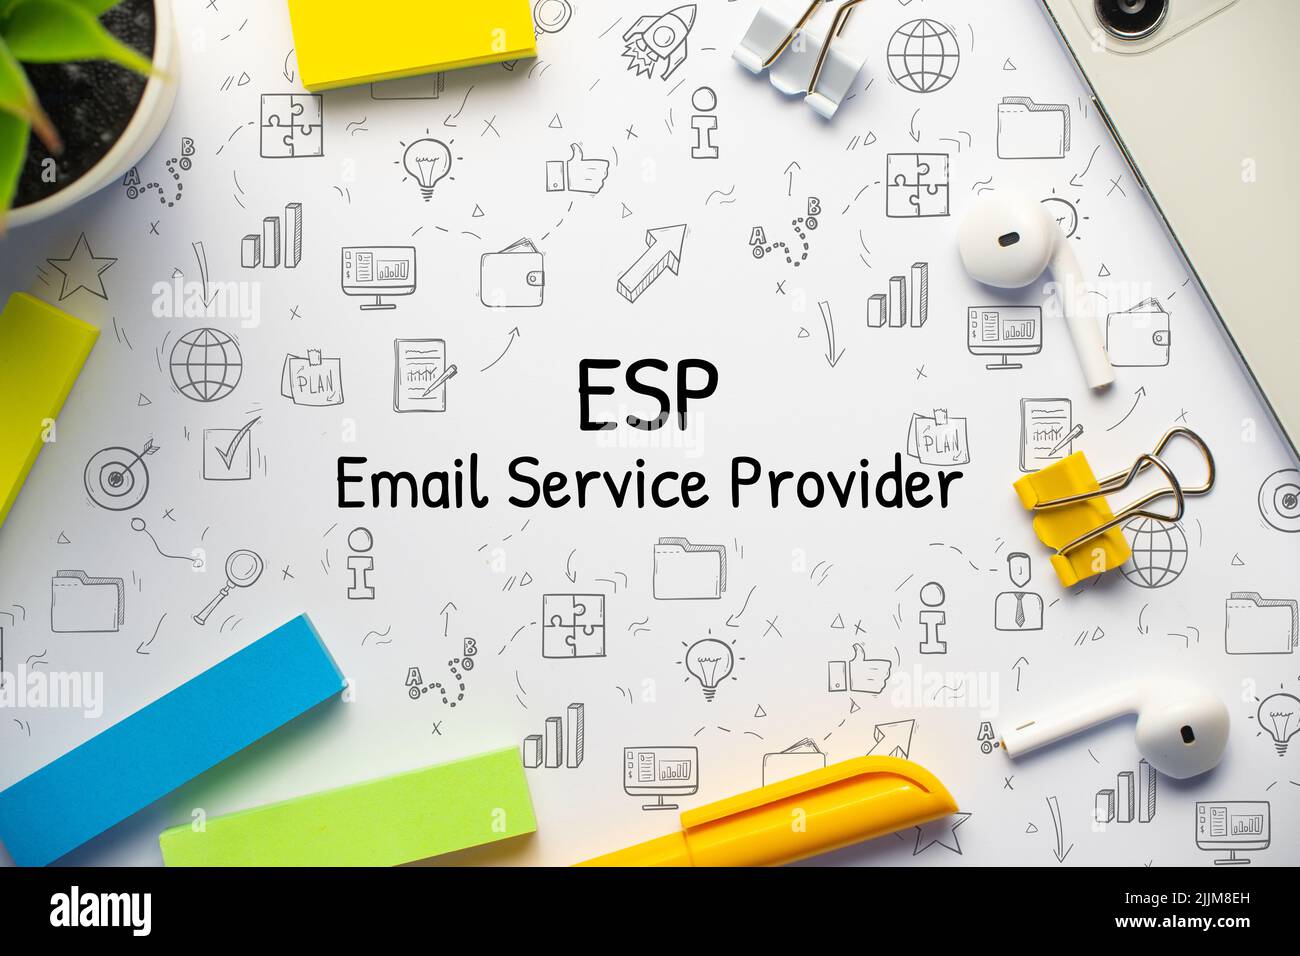 Concept business marketing acronym ESP or Email Service Provider Stock  Photo - Alamy